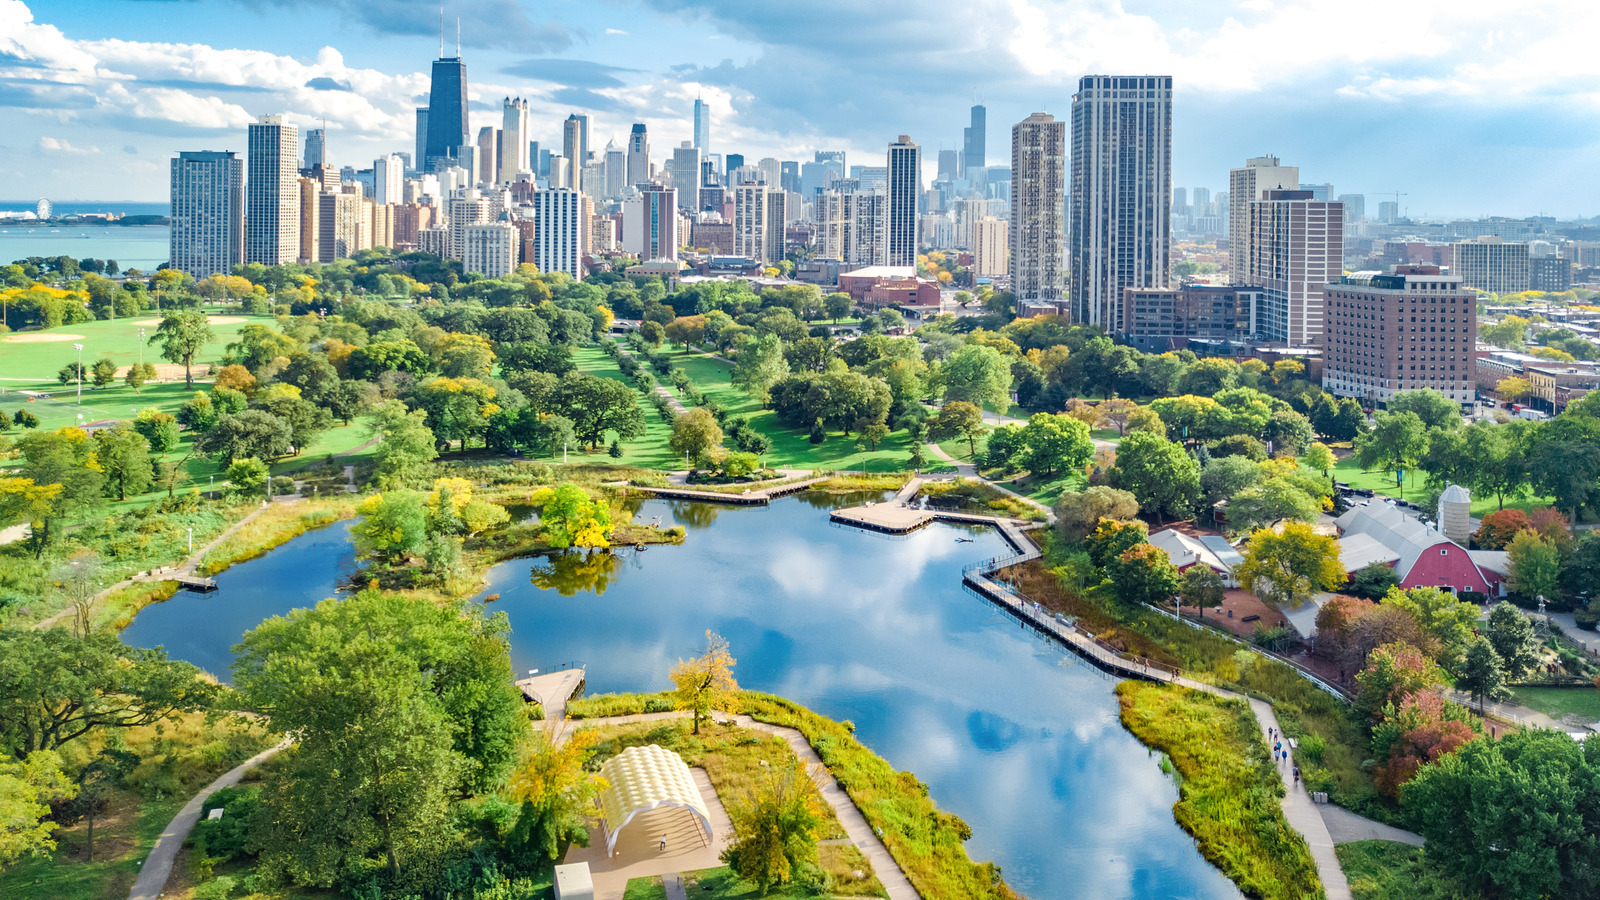 Lincoln Park Is The FamilyFriendly Neighborhood Pick For Chicago Travelers